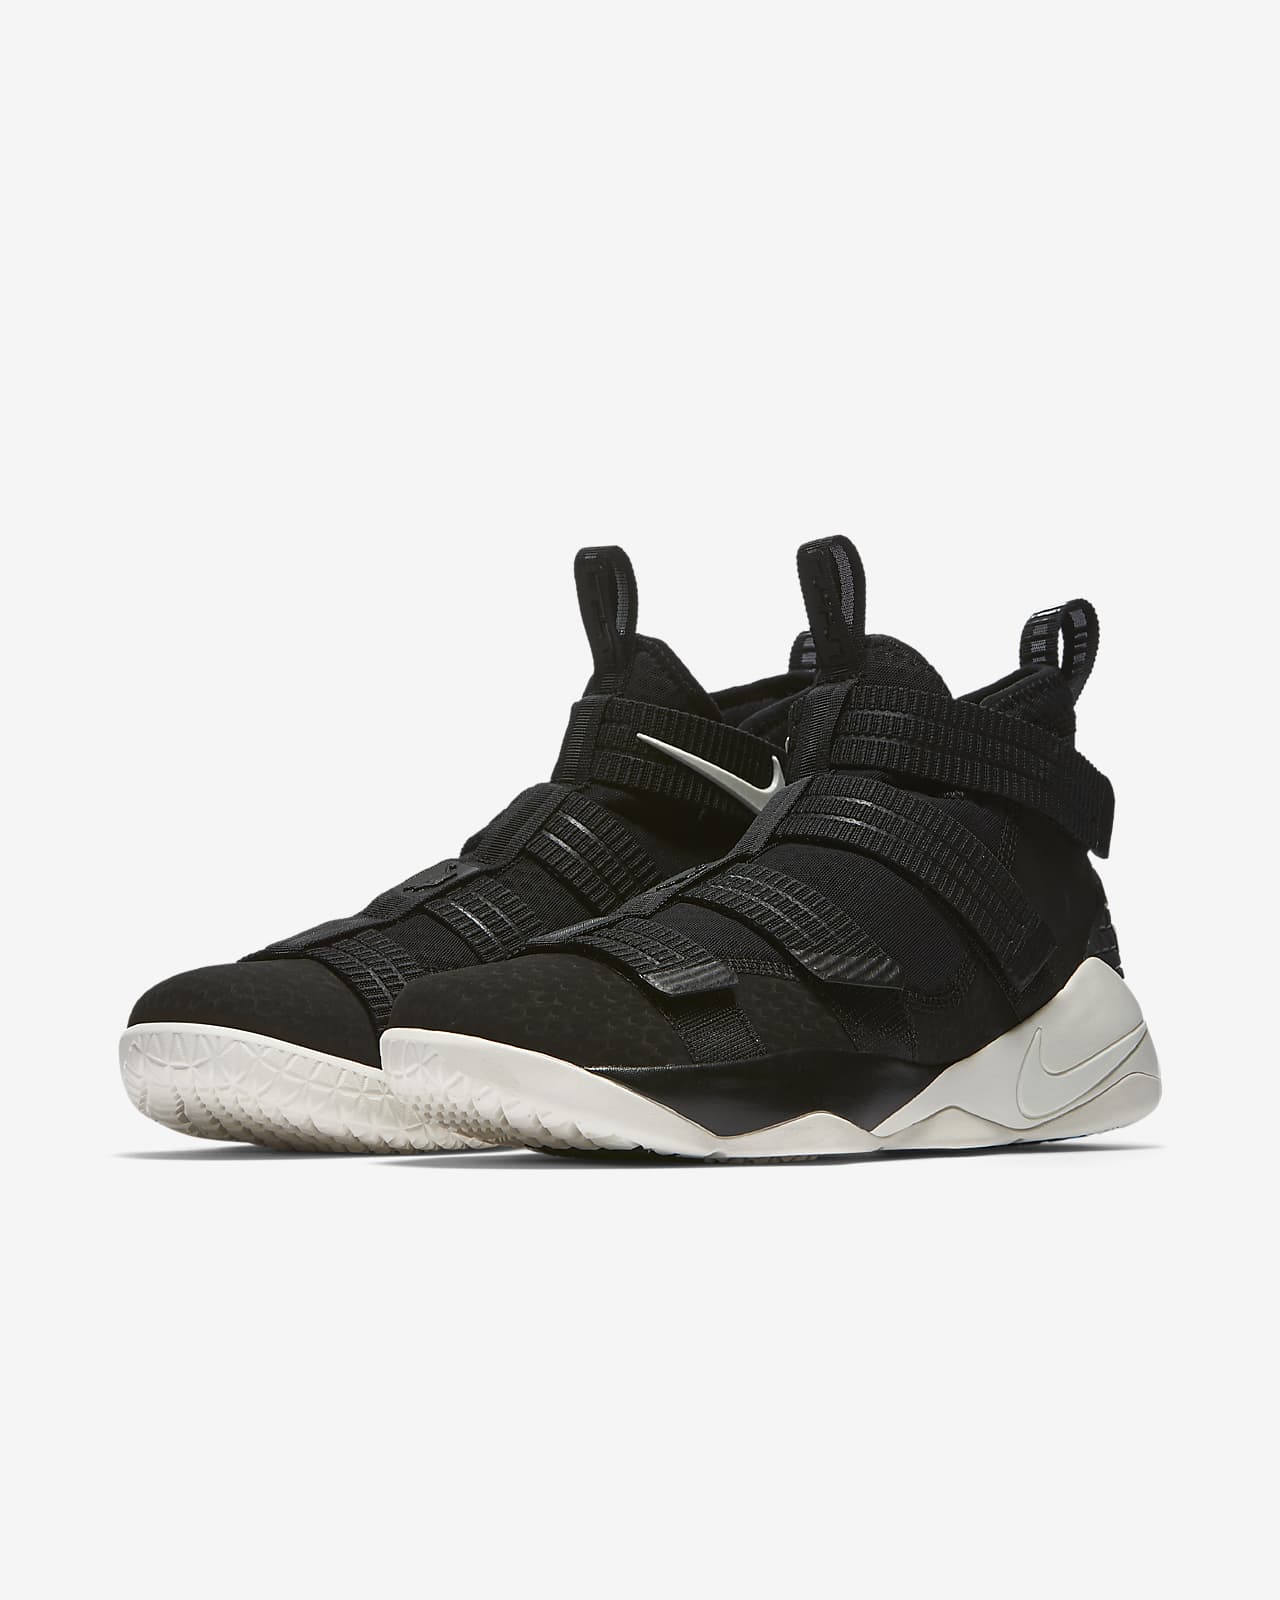 lebron soldier xi mens basketball shoes